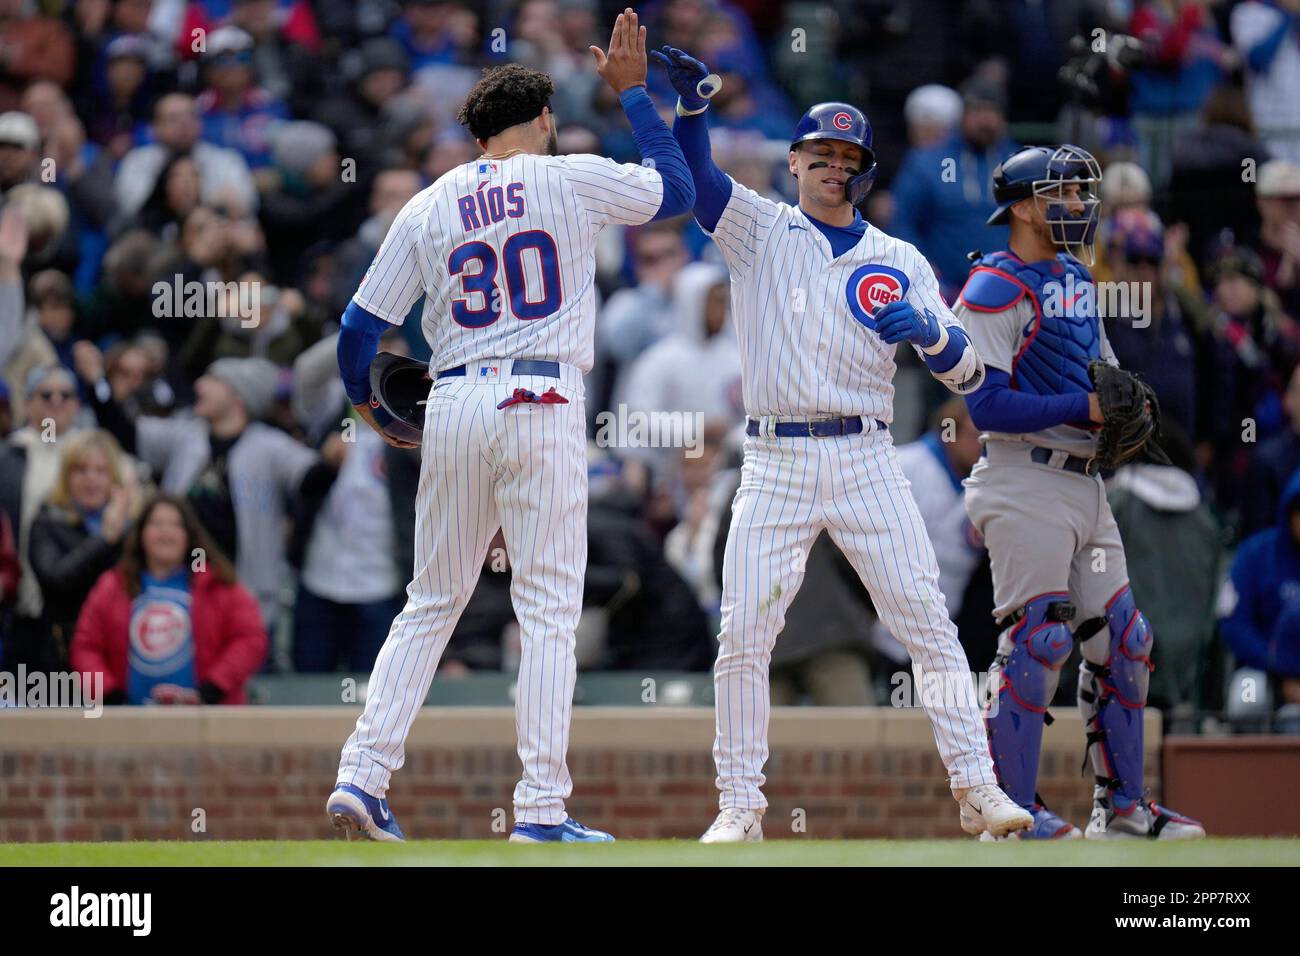 Chicago Cubs' Nico Hoerner, right, high-fives Chicago Cubs' Edwin